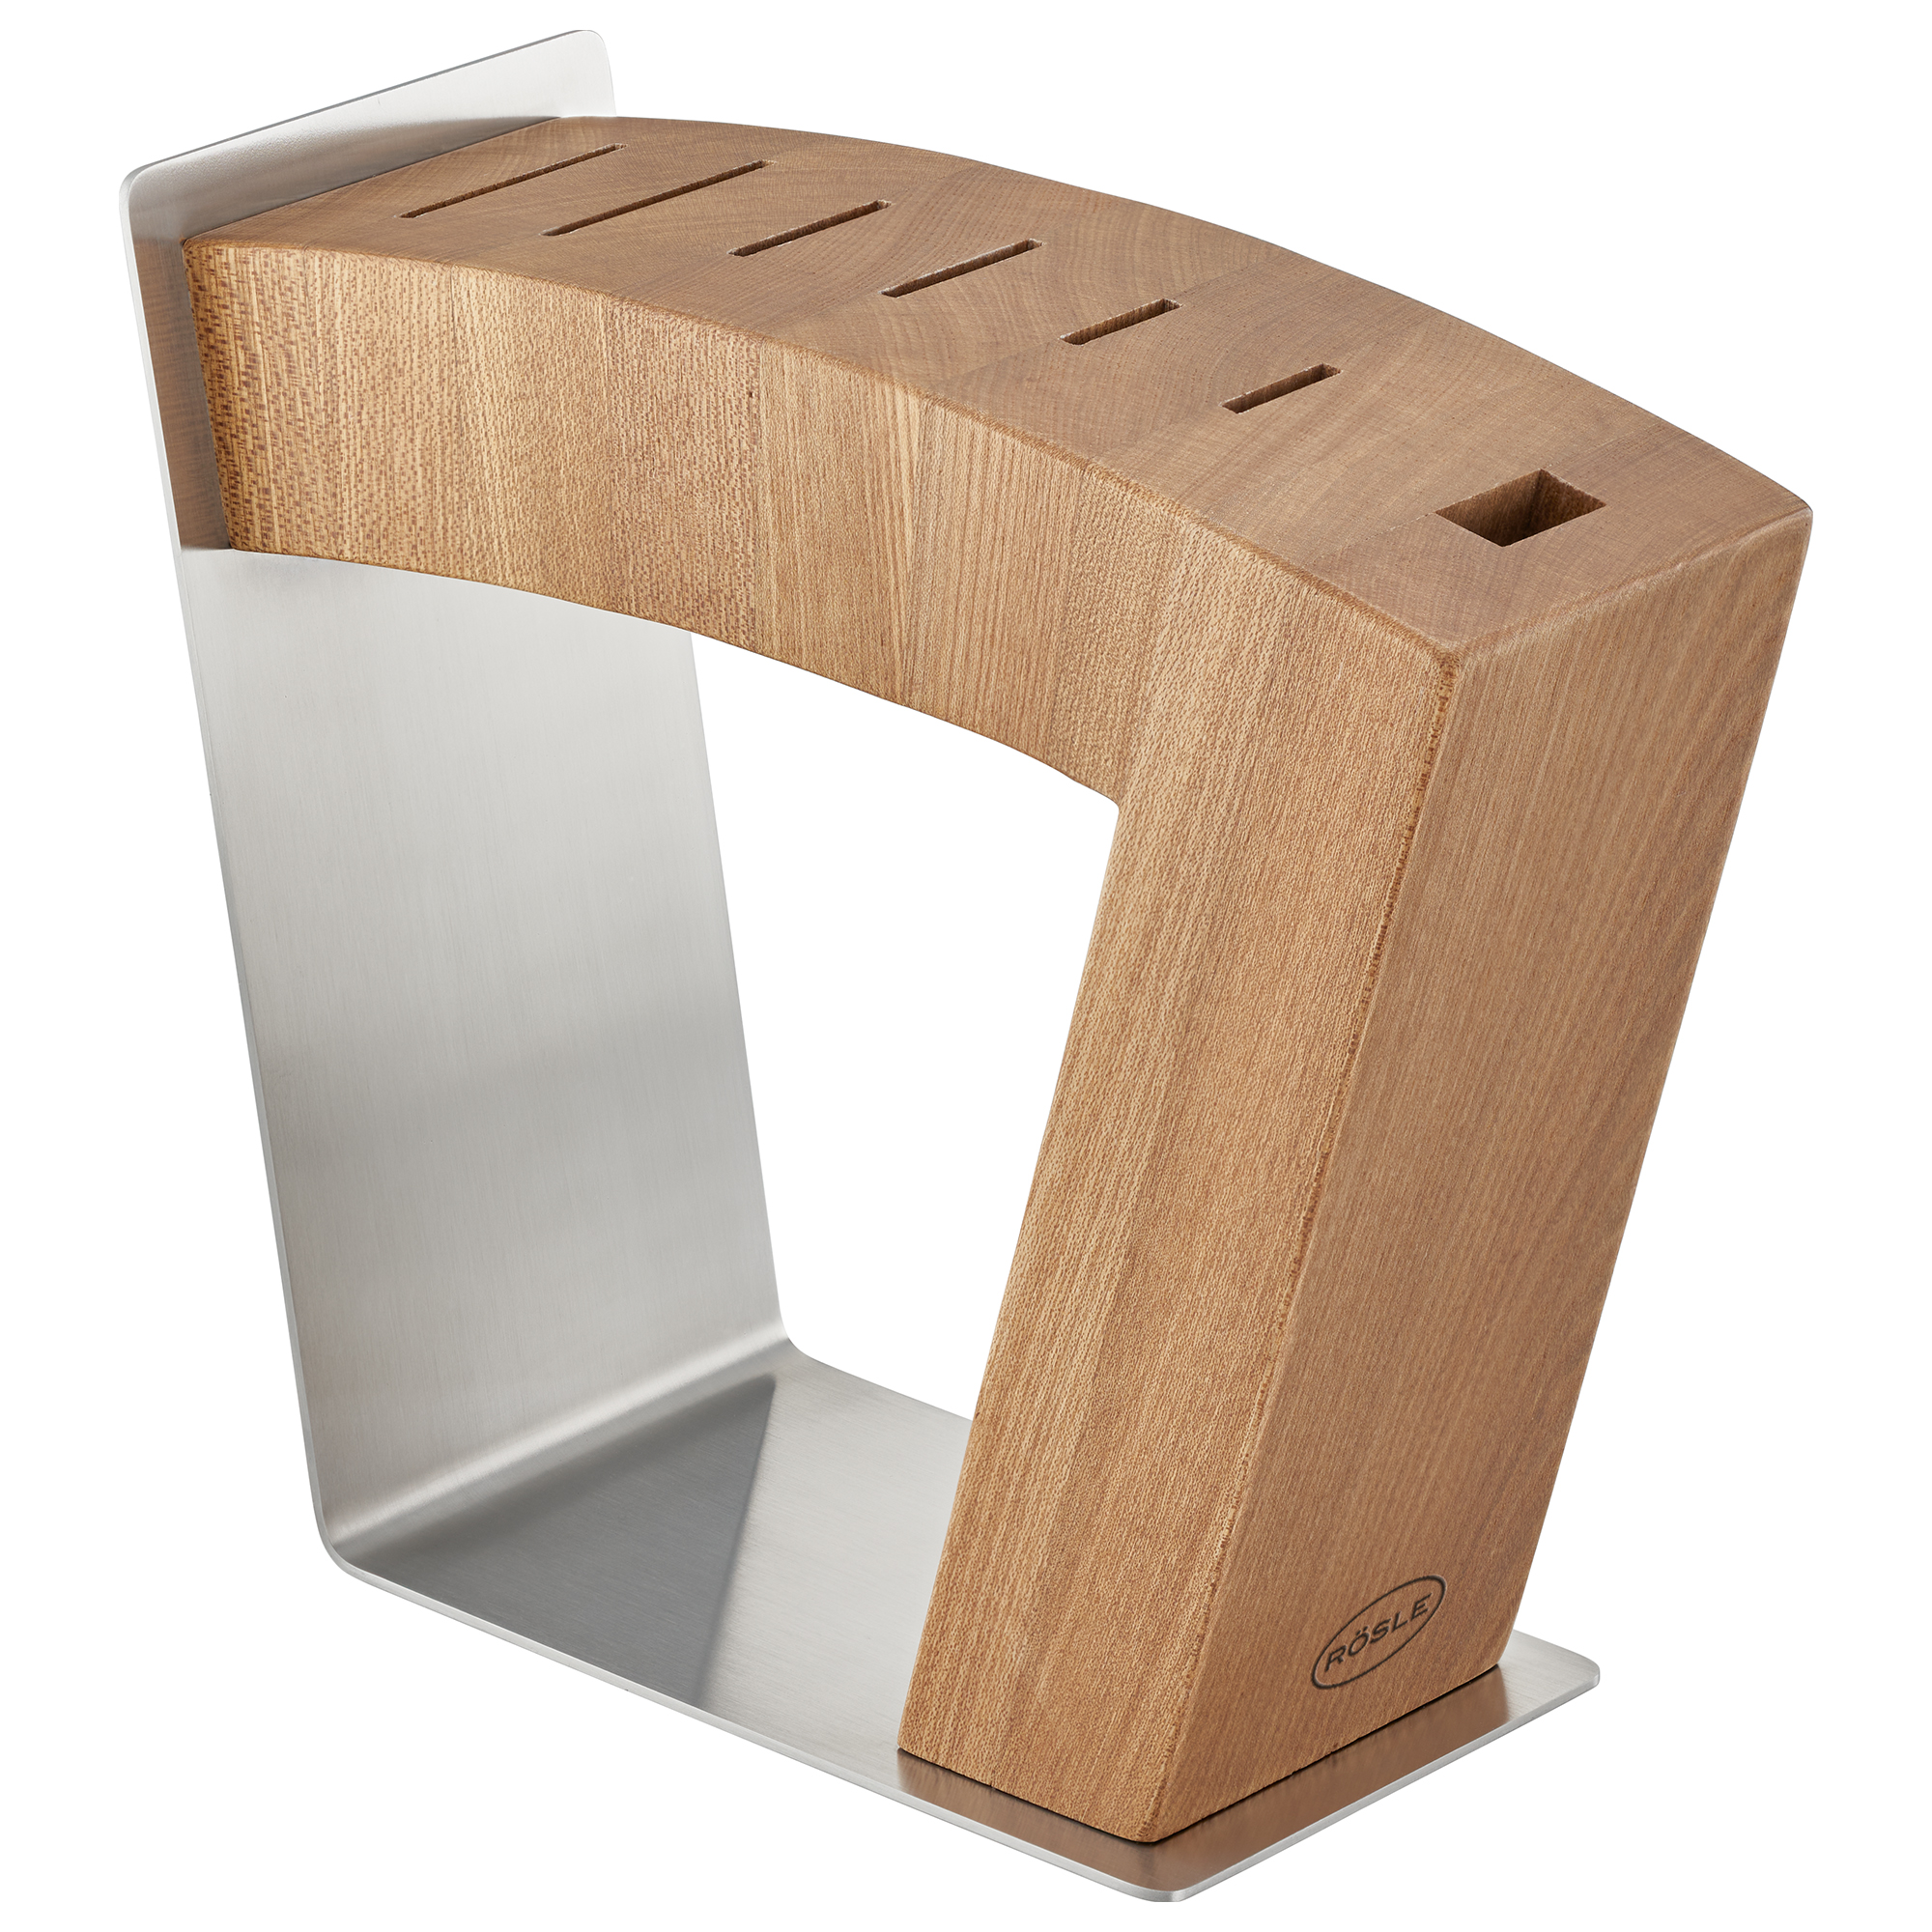 Knife block "MoveX" without knives